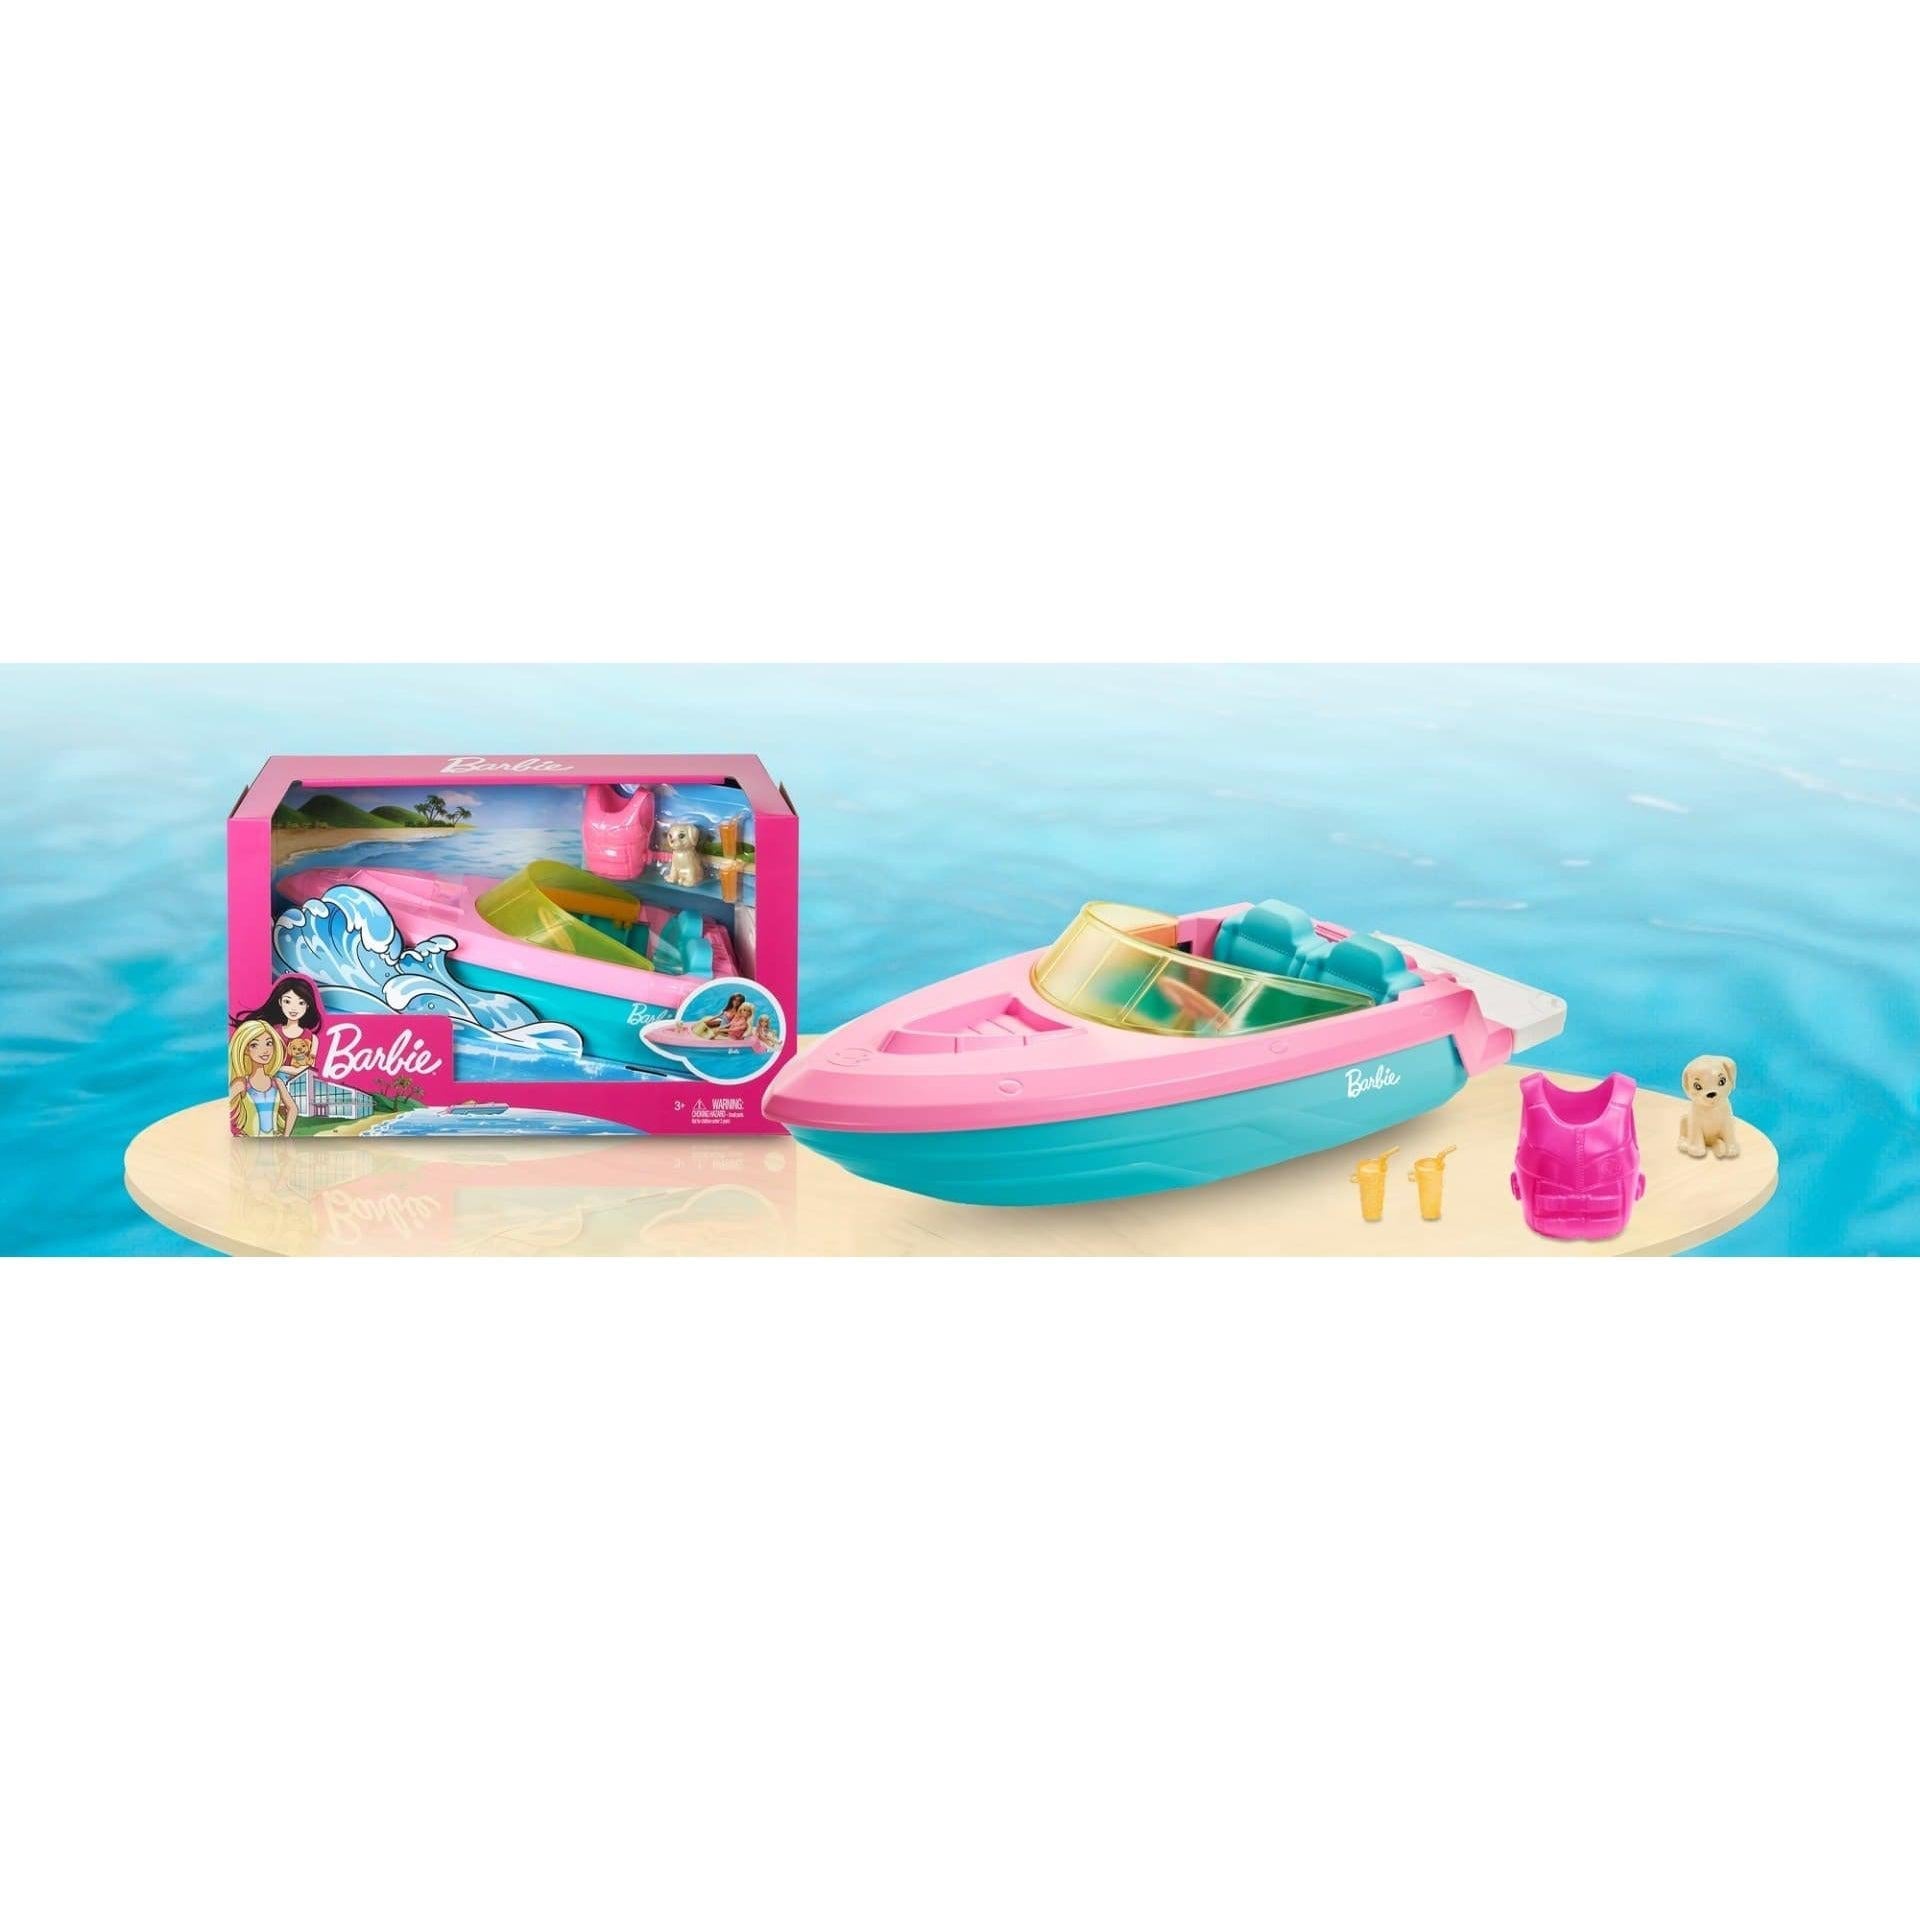 Mattel-Barbie Boat with Puppy and Accessories-GRG29-Legacy Toys